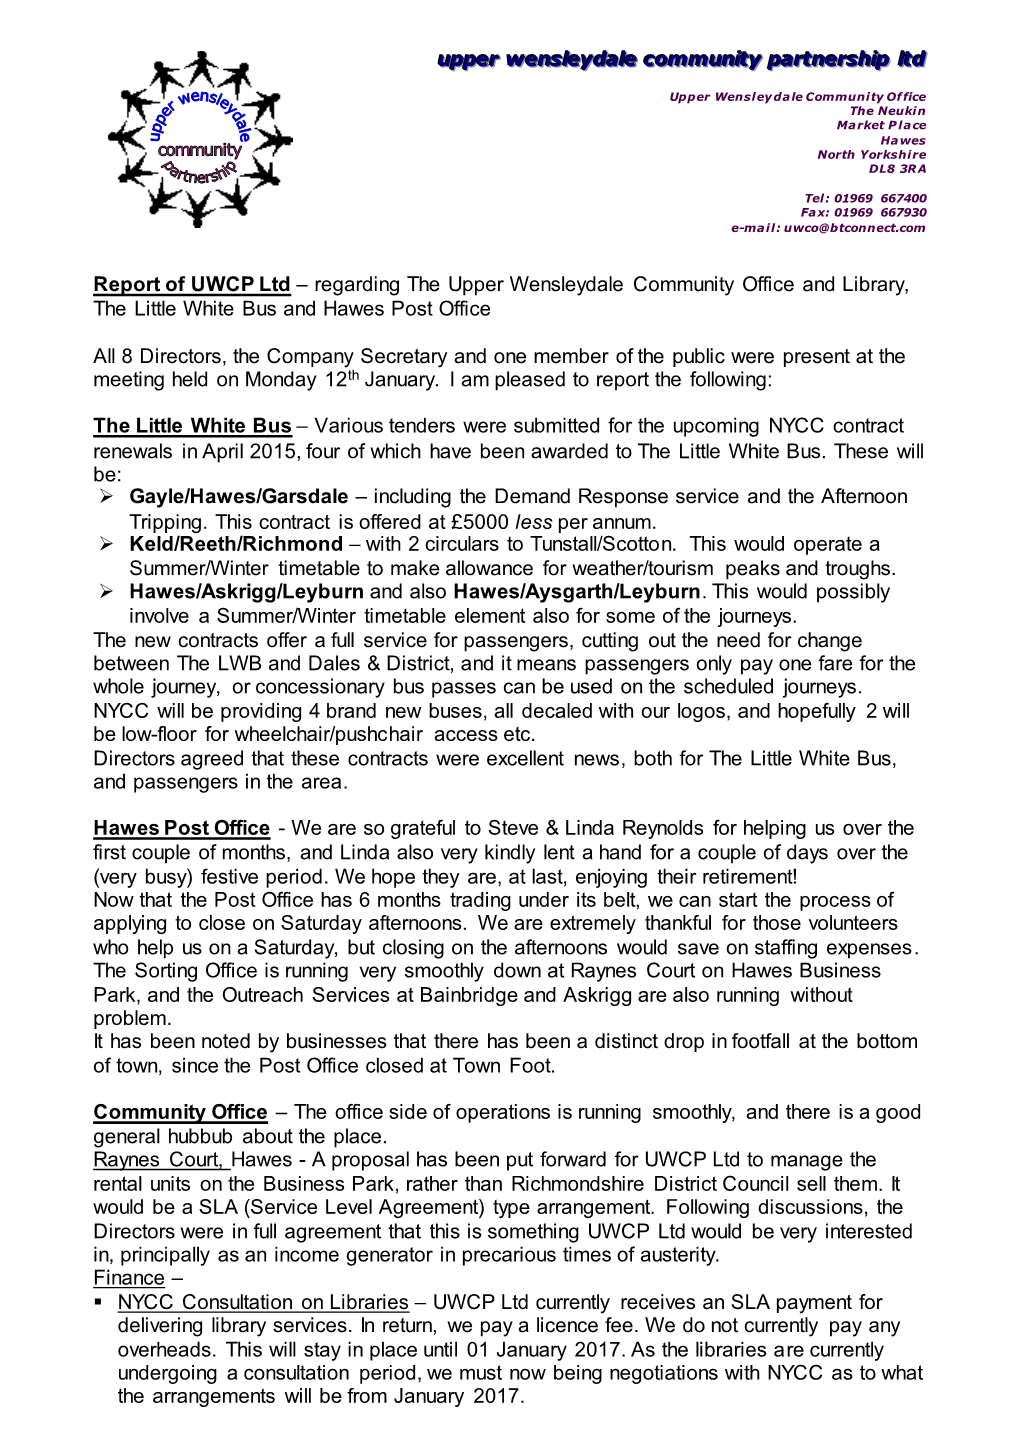 Report of UWCP Ltd – Regarding the Upper Wensleydale Community Office and Library, the Little White Bus and Hawes Post Office